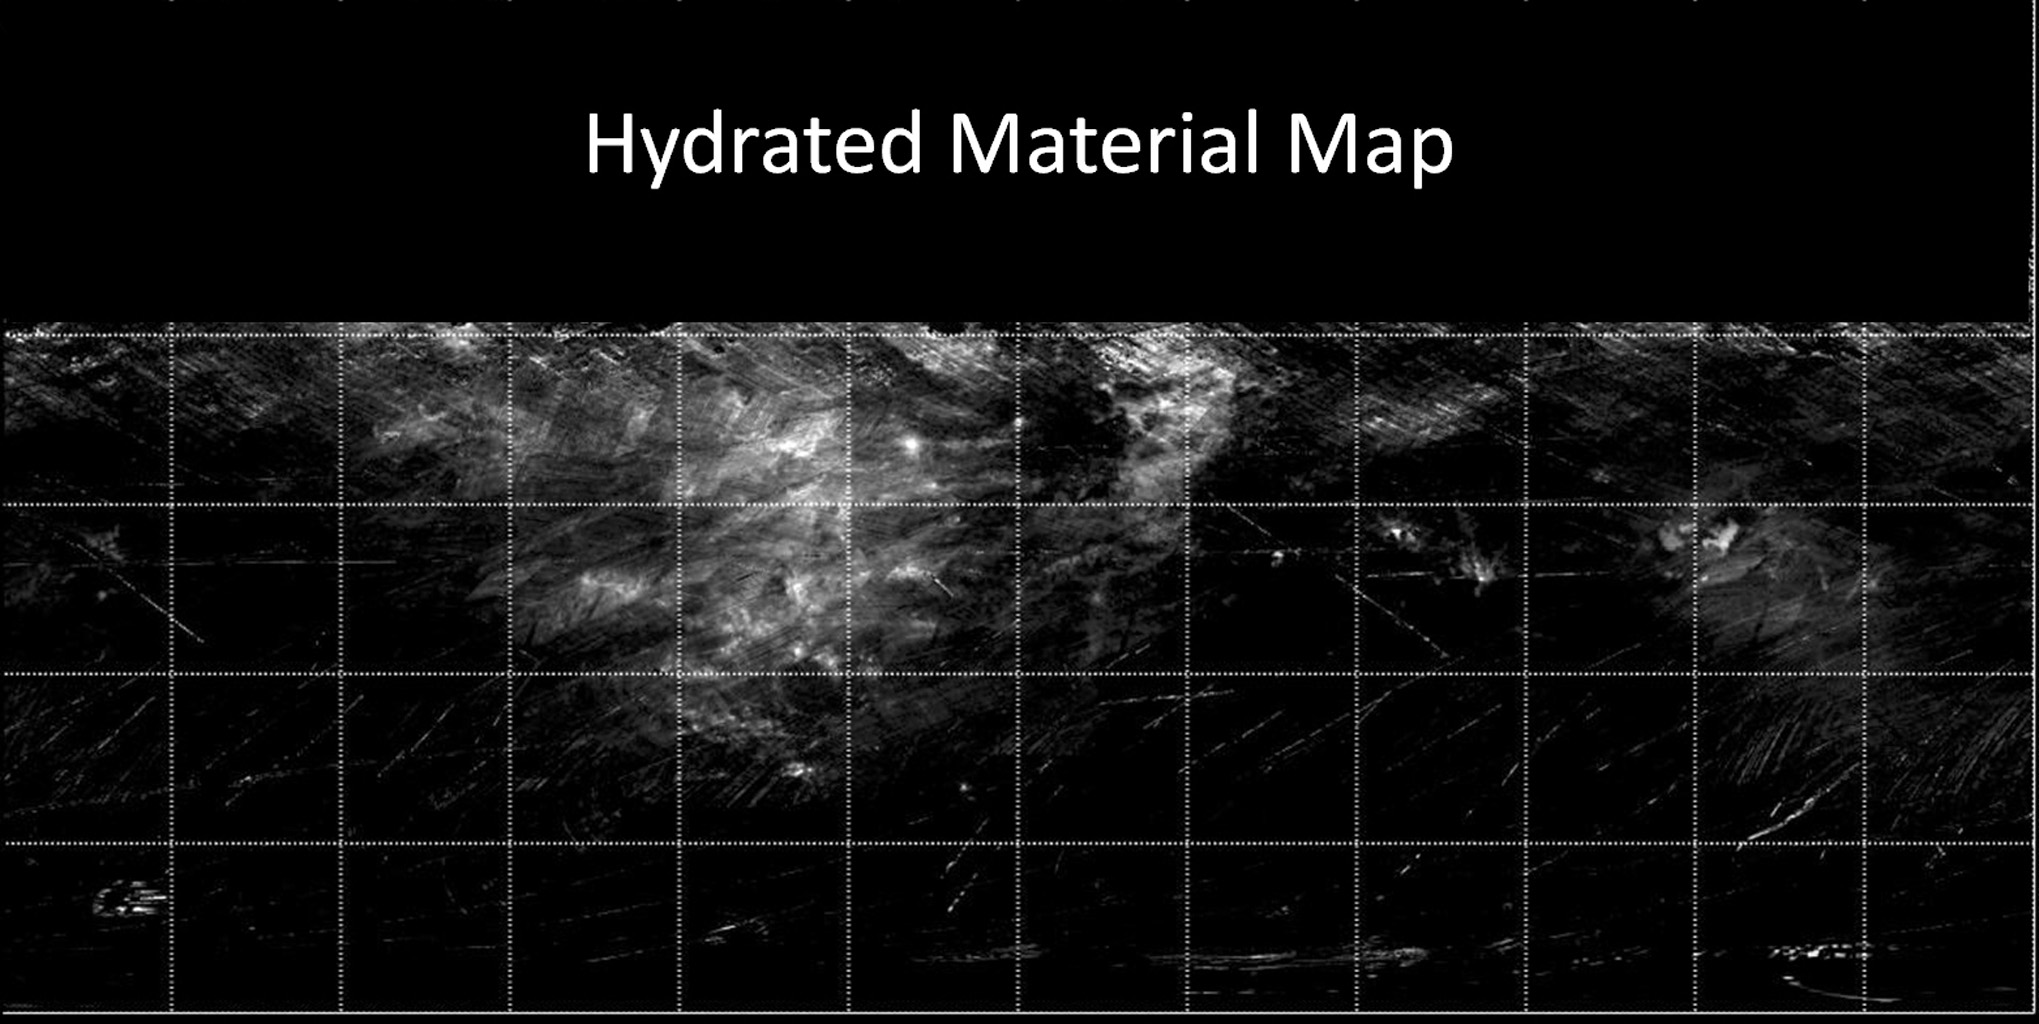 Map of Hydrated Minerals on Vesta